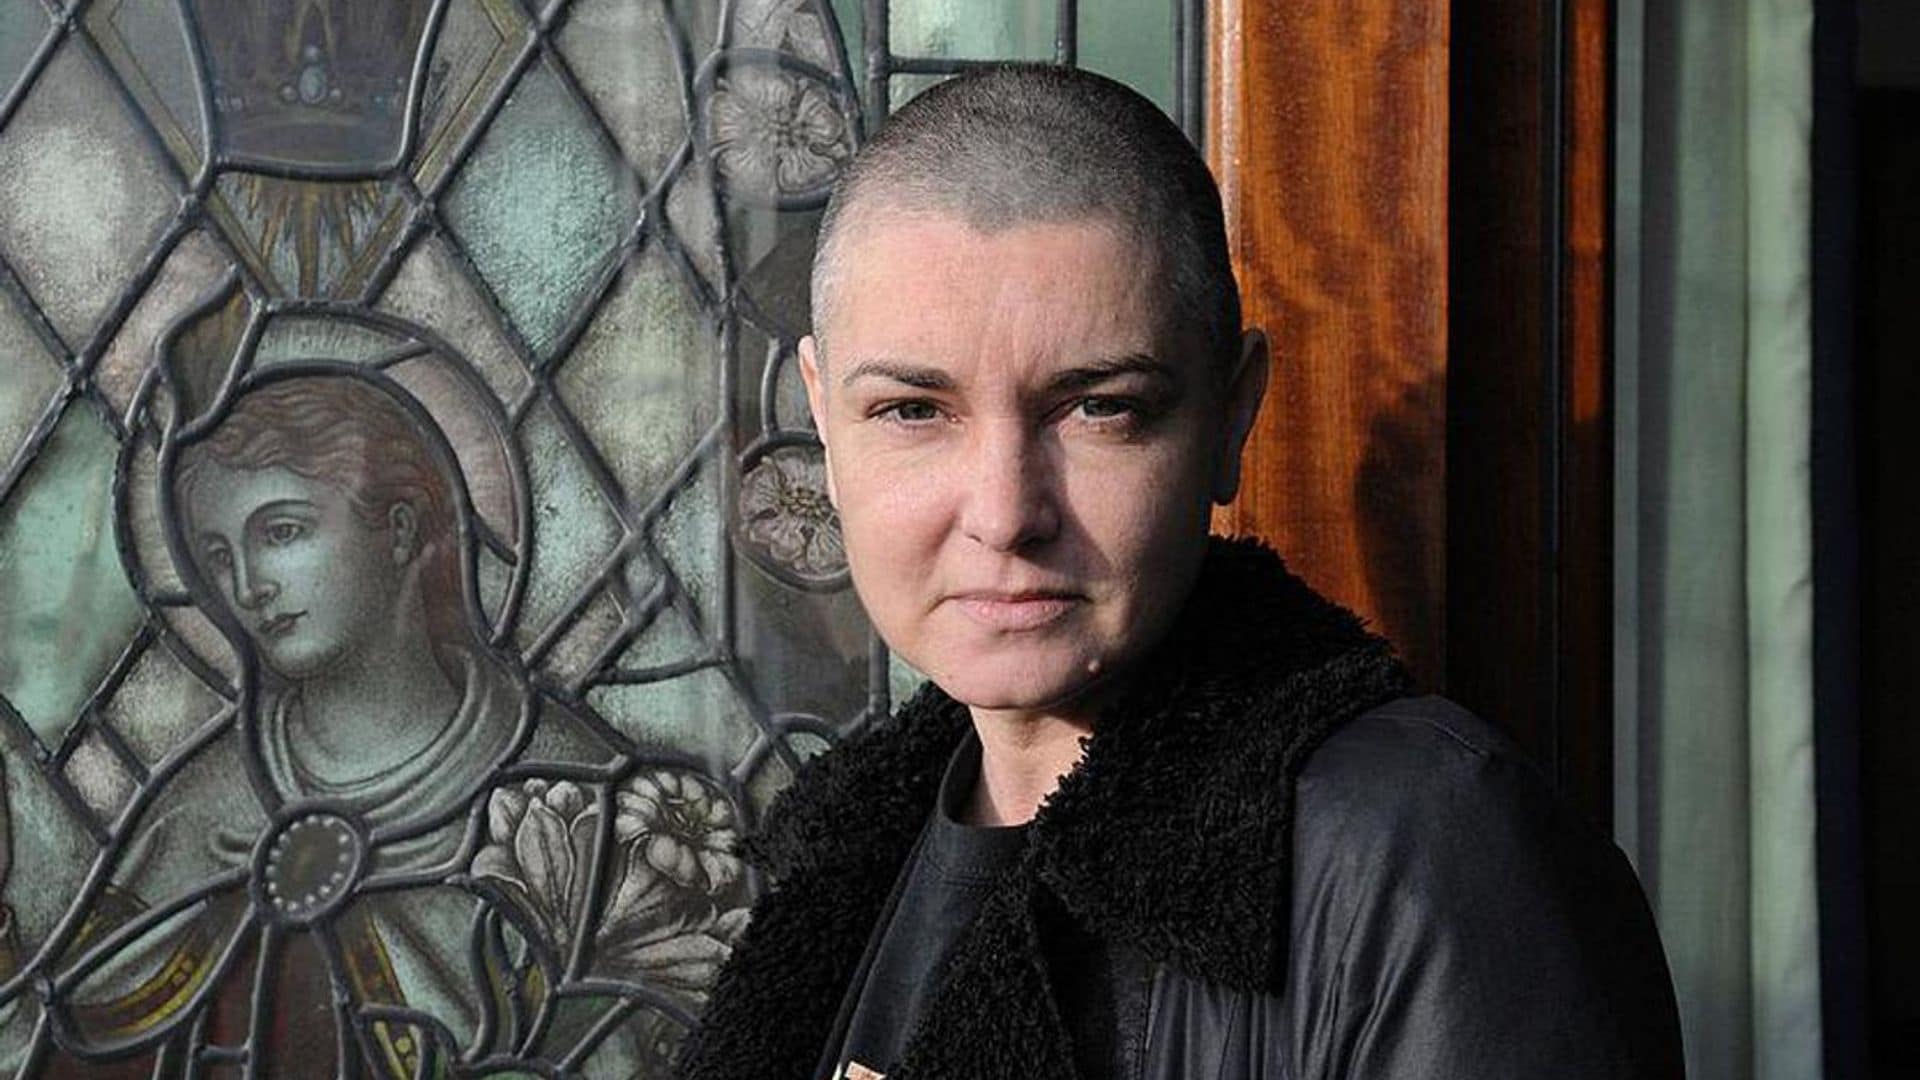 Sinead O’Connor’s cause of death has been revealed